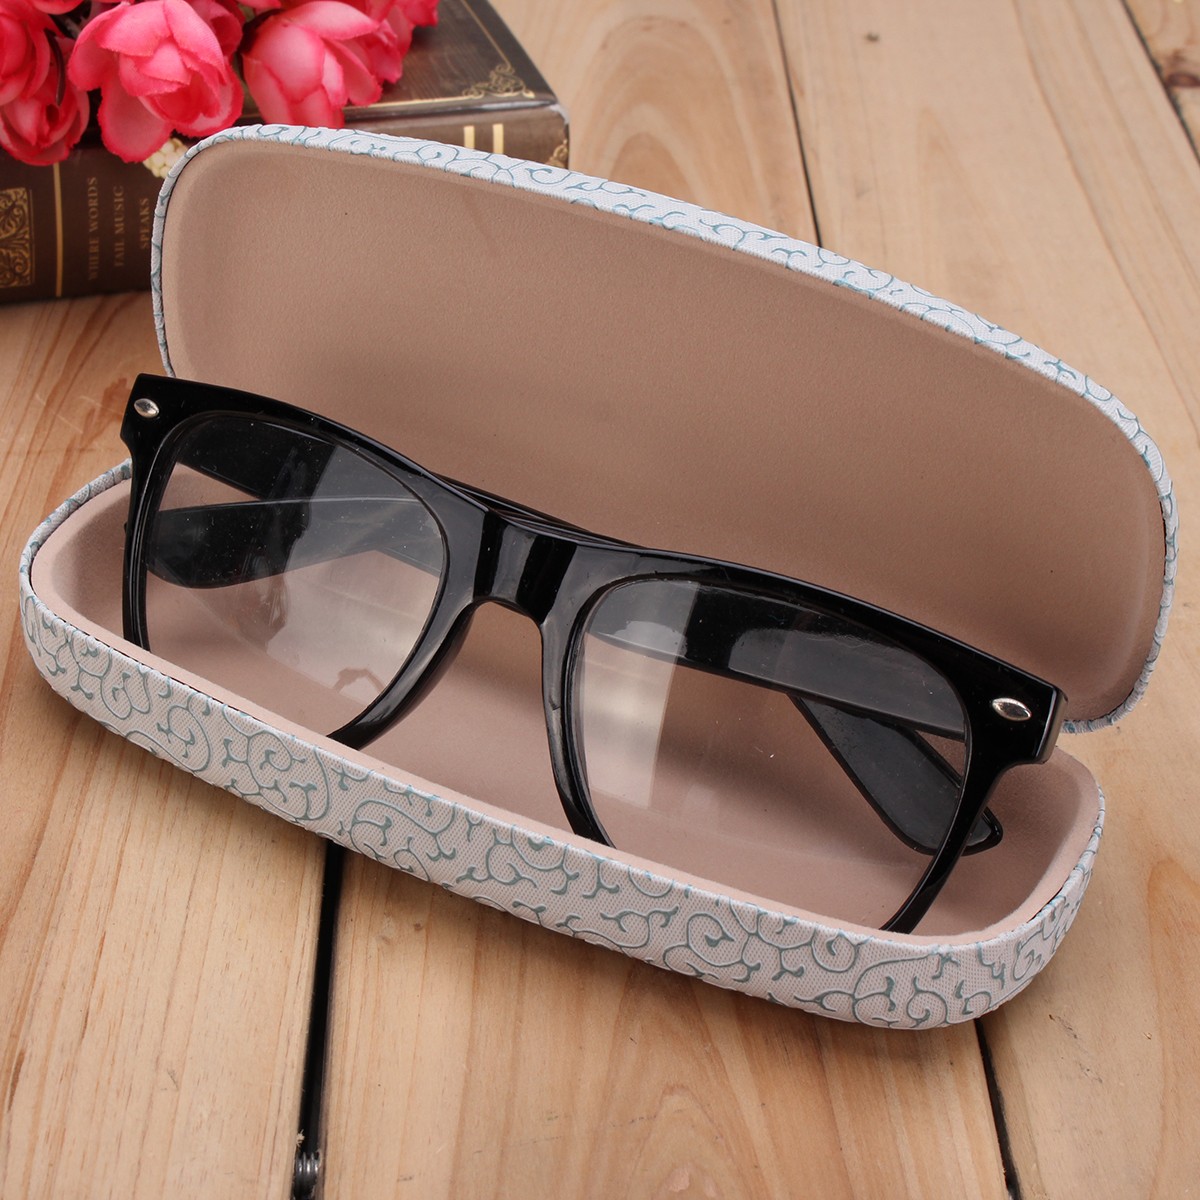 Vintage-Hard-Sunglass-Glasses-Box-Lace-Pattern-Reading-Glasses-Storage-Spectacle-Glasses-Case-1028007